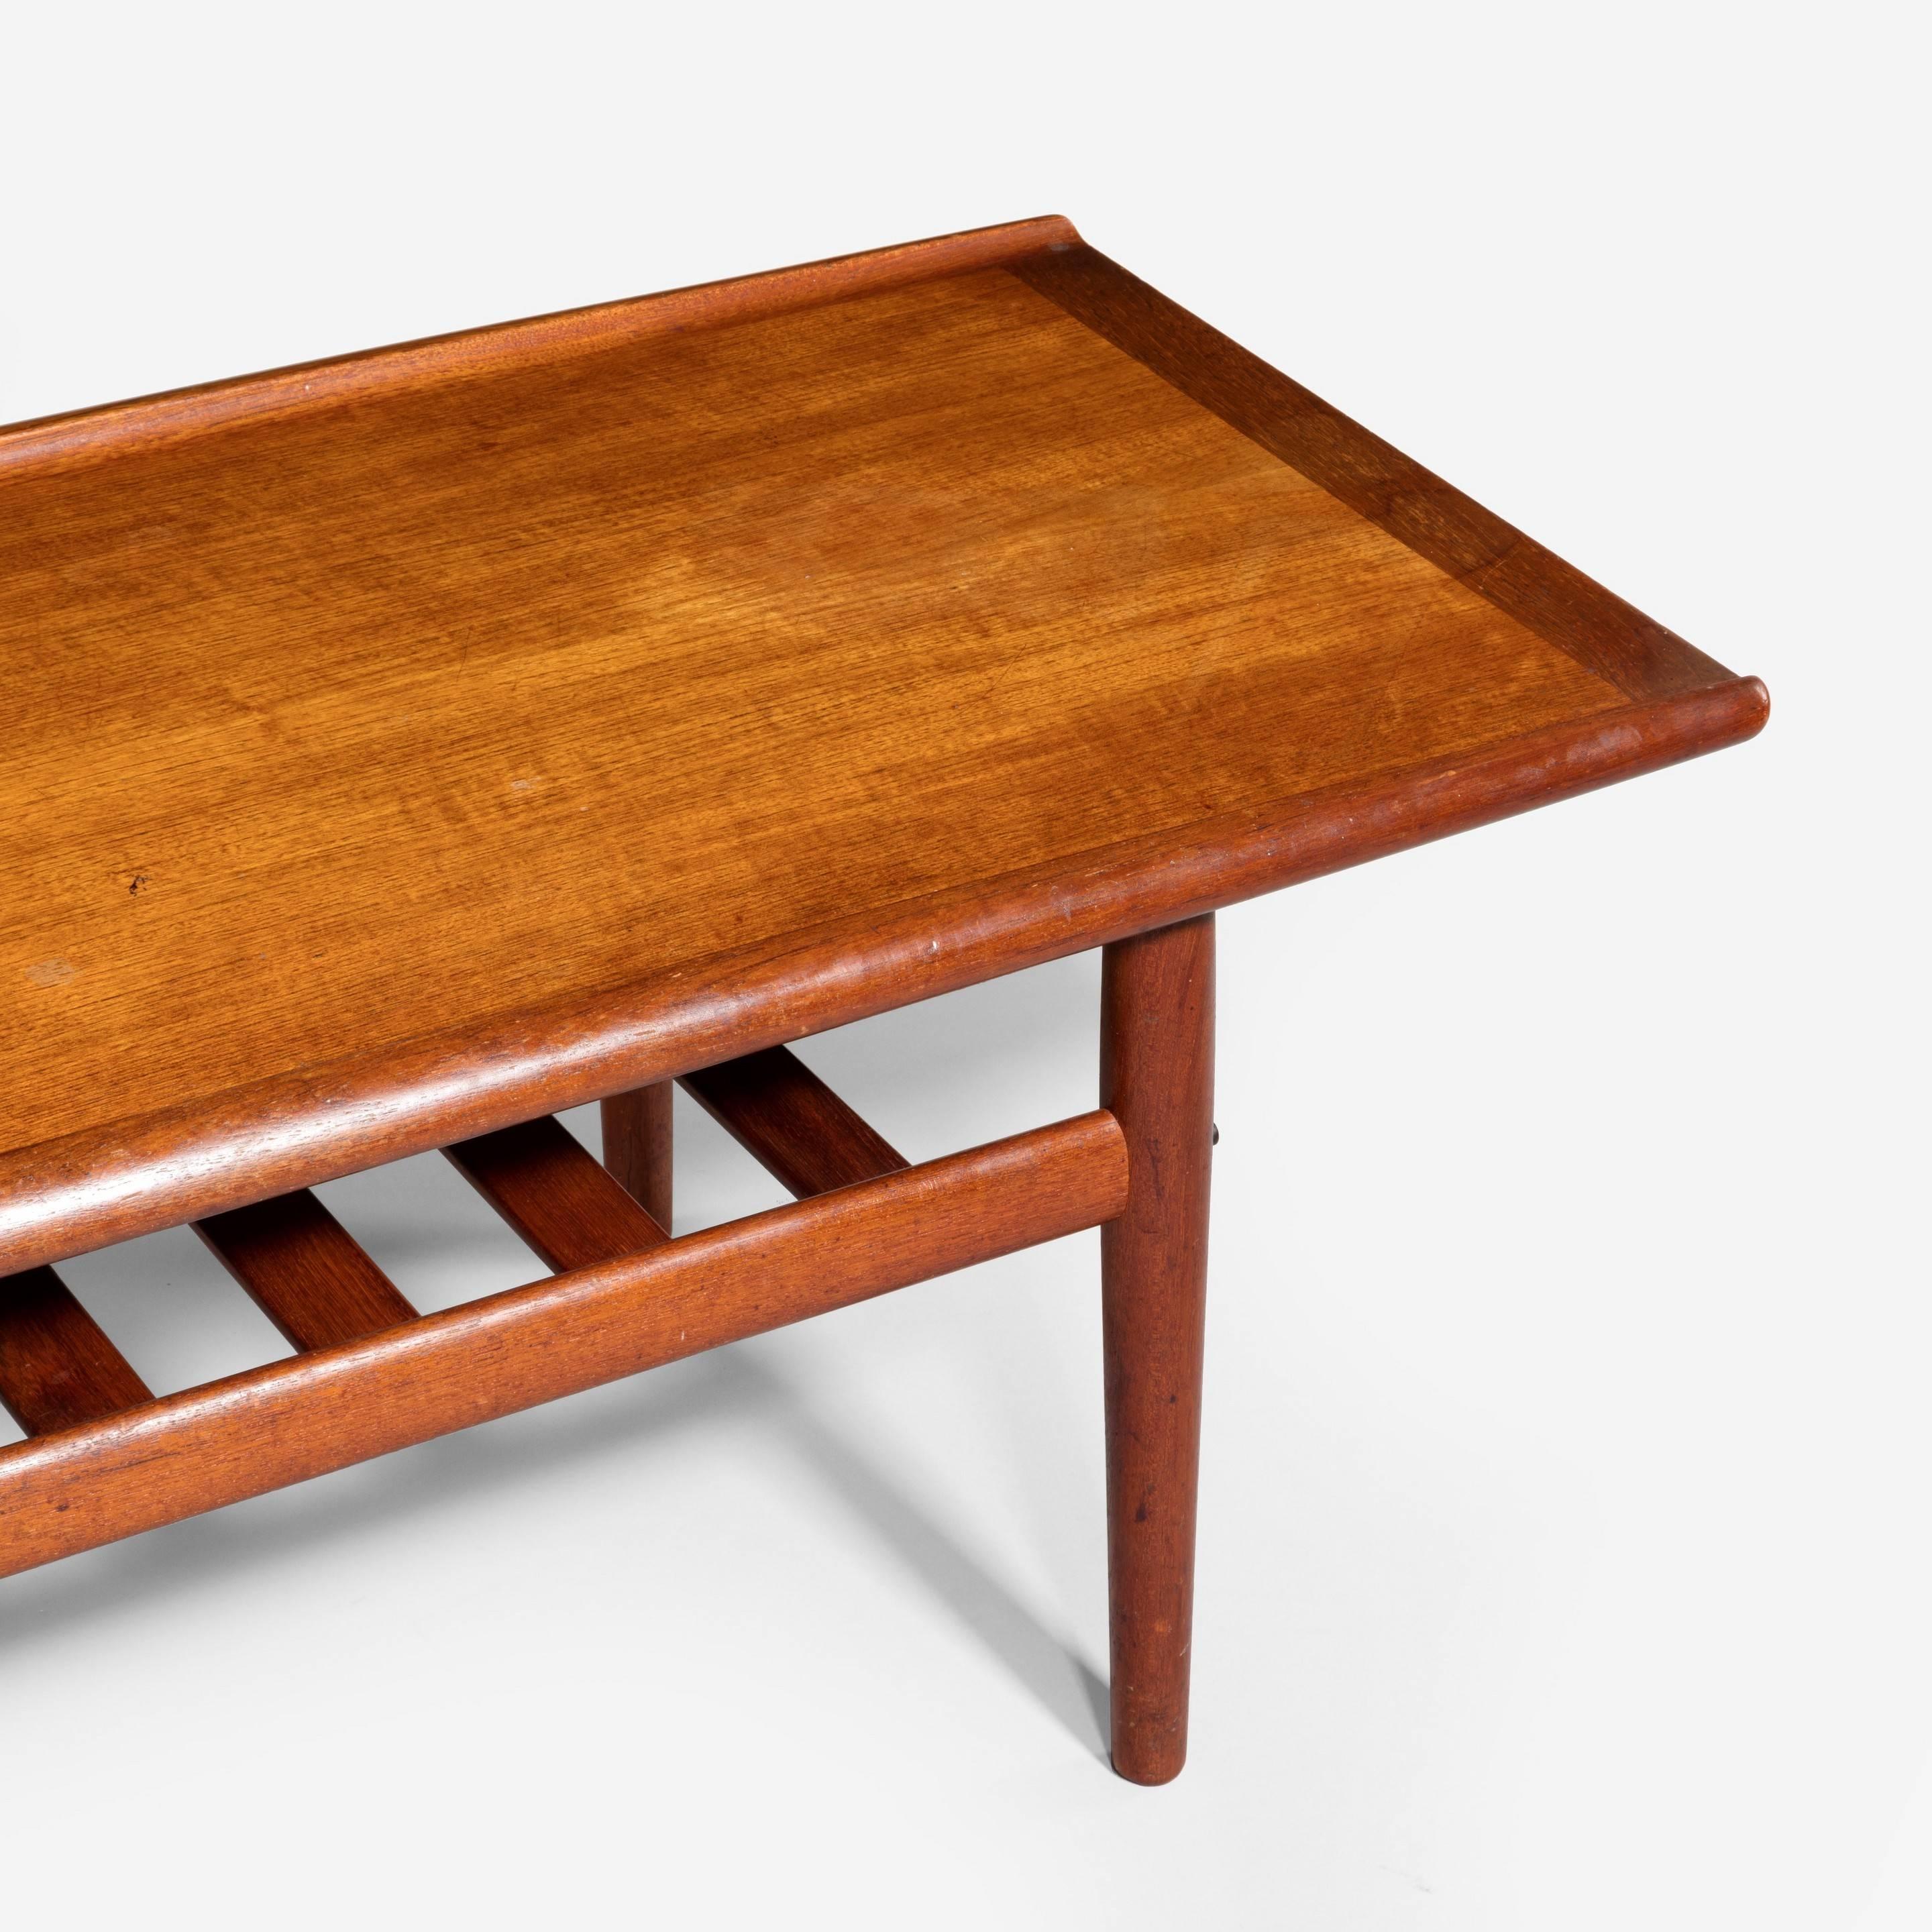 Danish vintage coffee table by Glostrup.